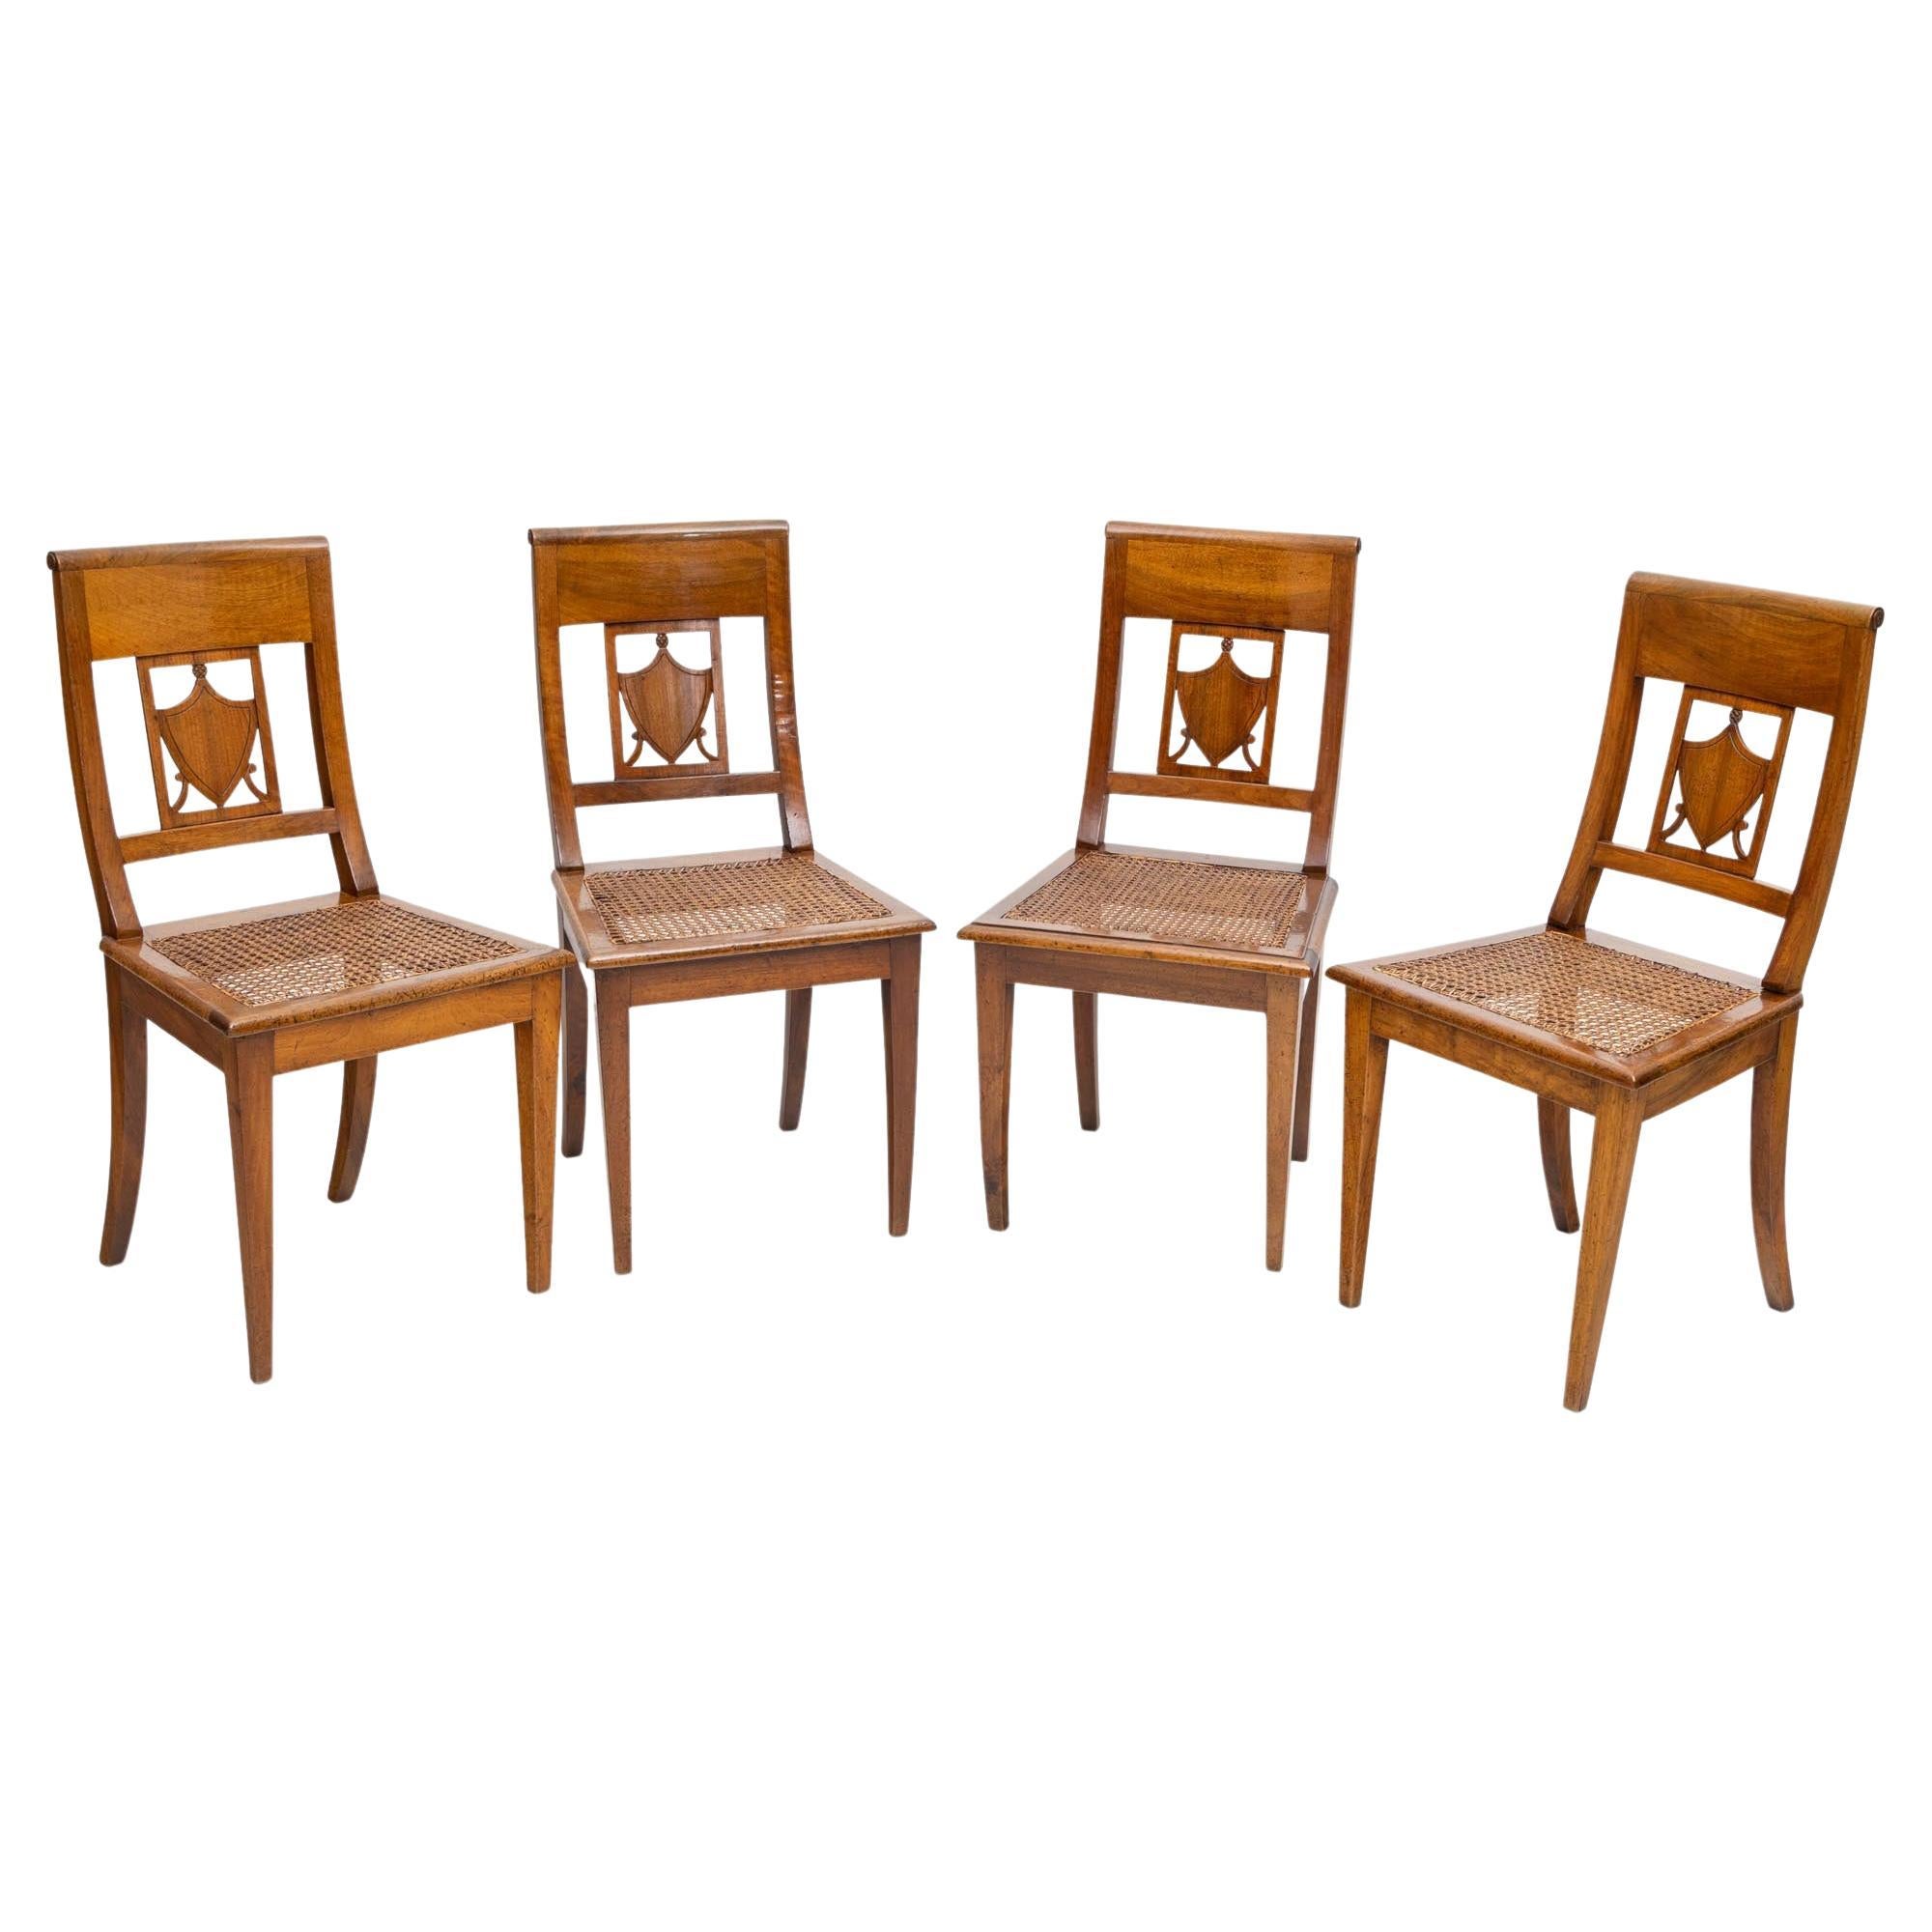 Set of Four Dining Room Chairs, 19th Century